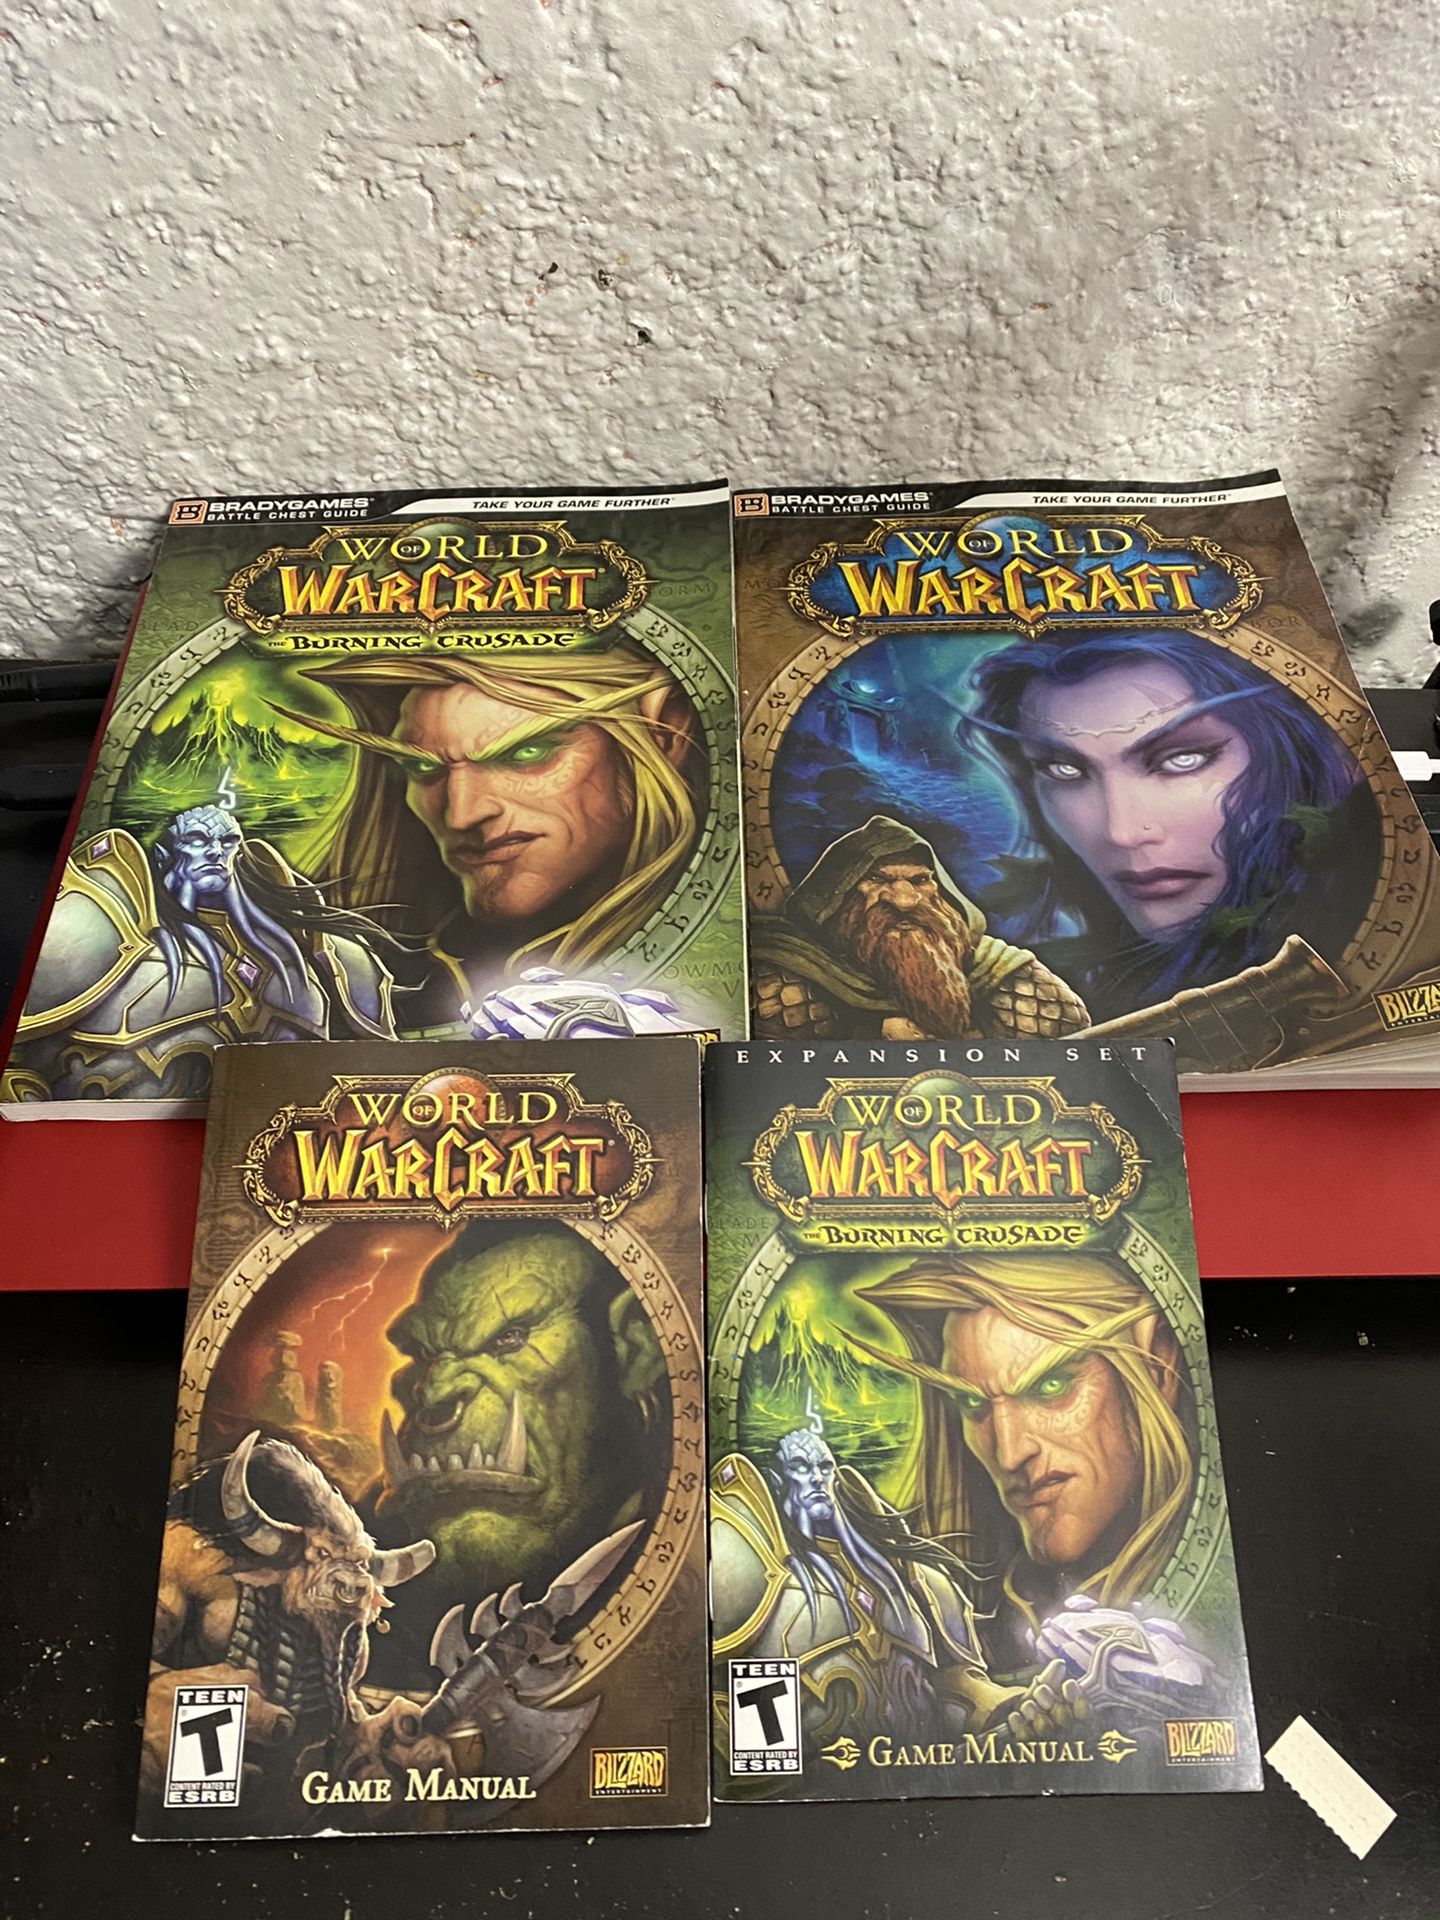 World of Warcraft battle chest guides and game manuals